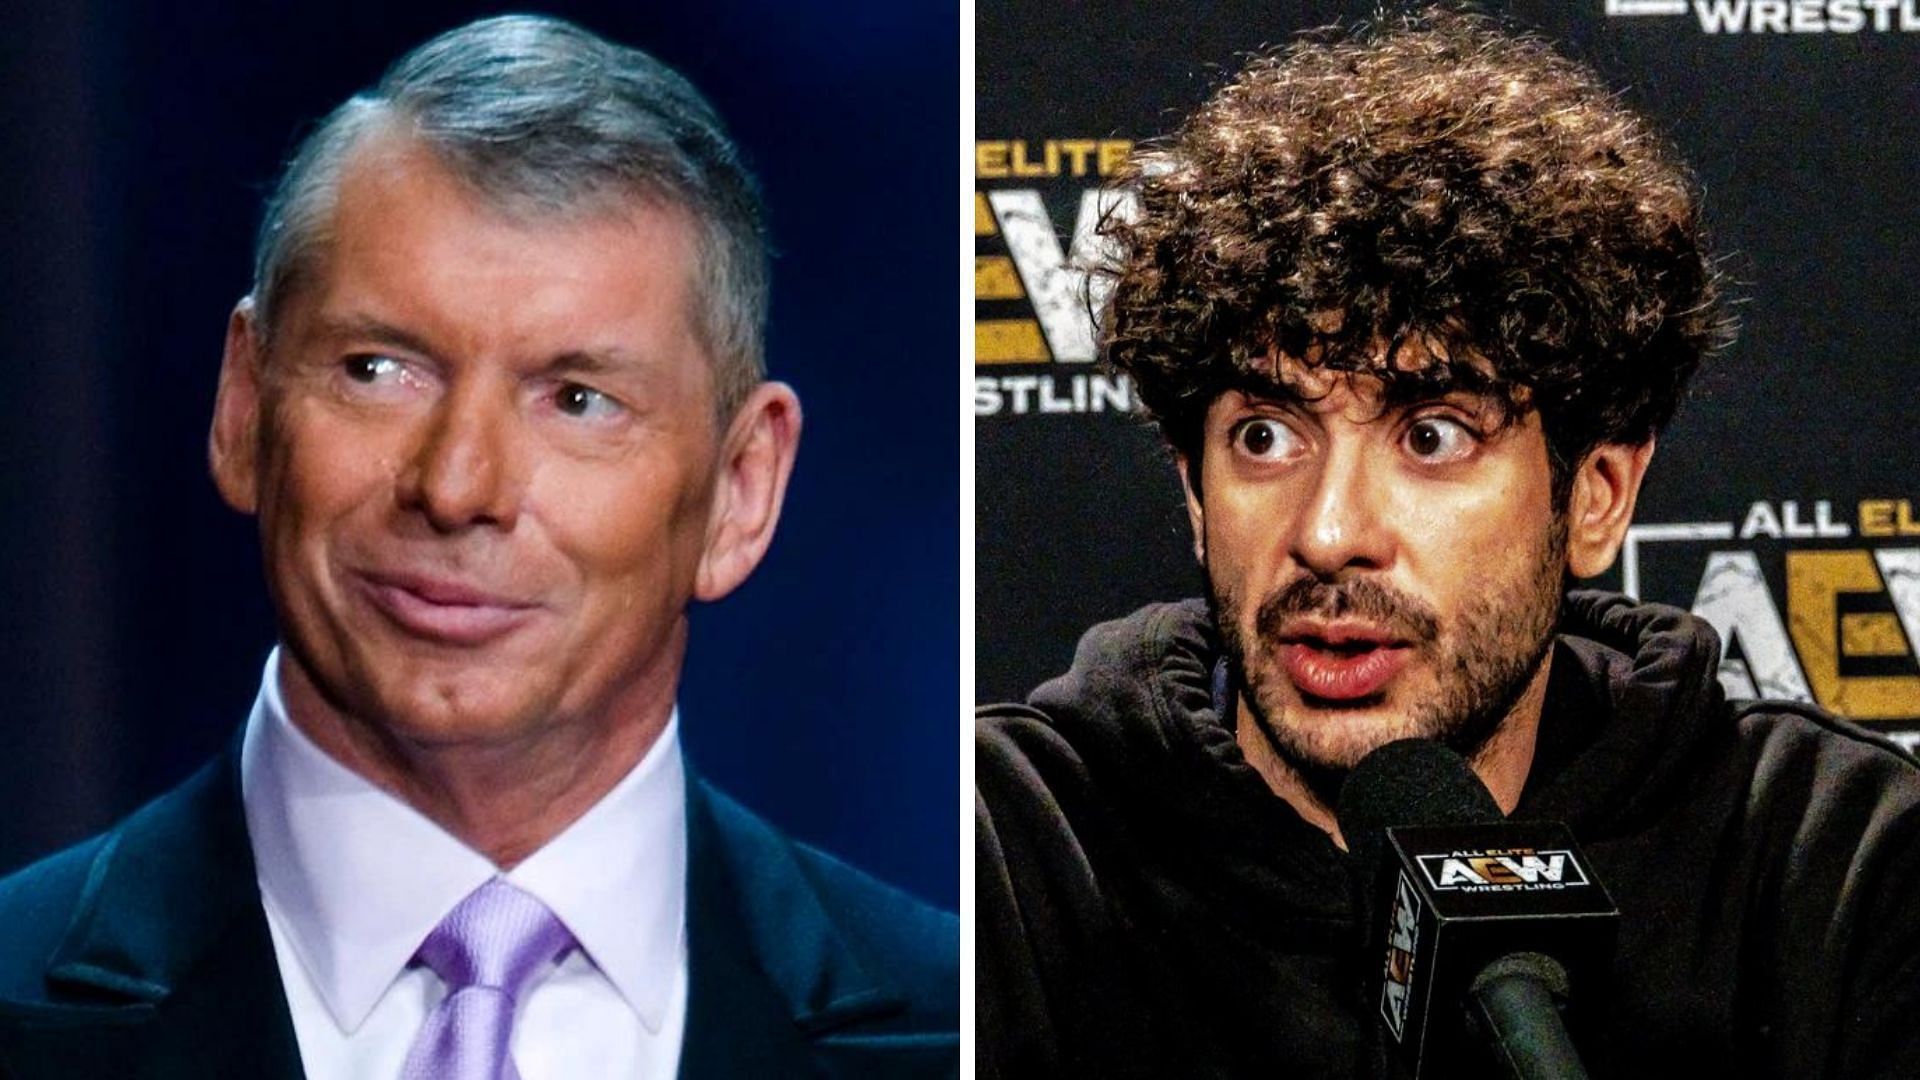 Vince McMahon and Tony Khan are both prominent figures in the world of professional wrestling.